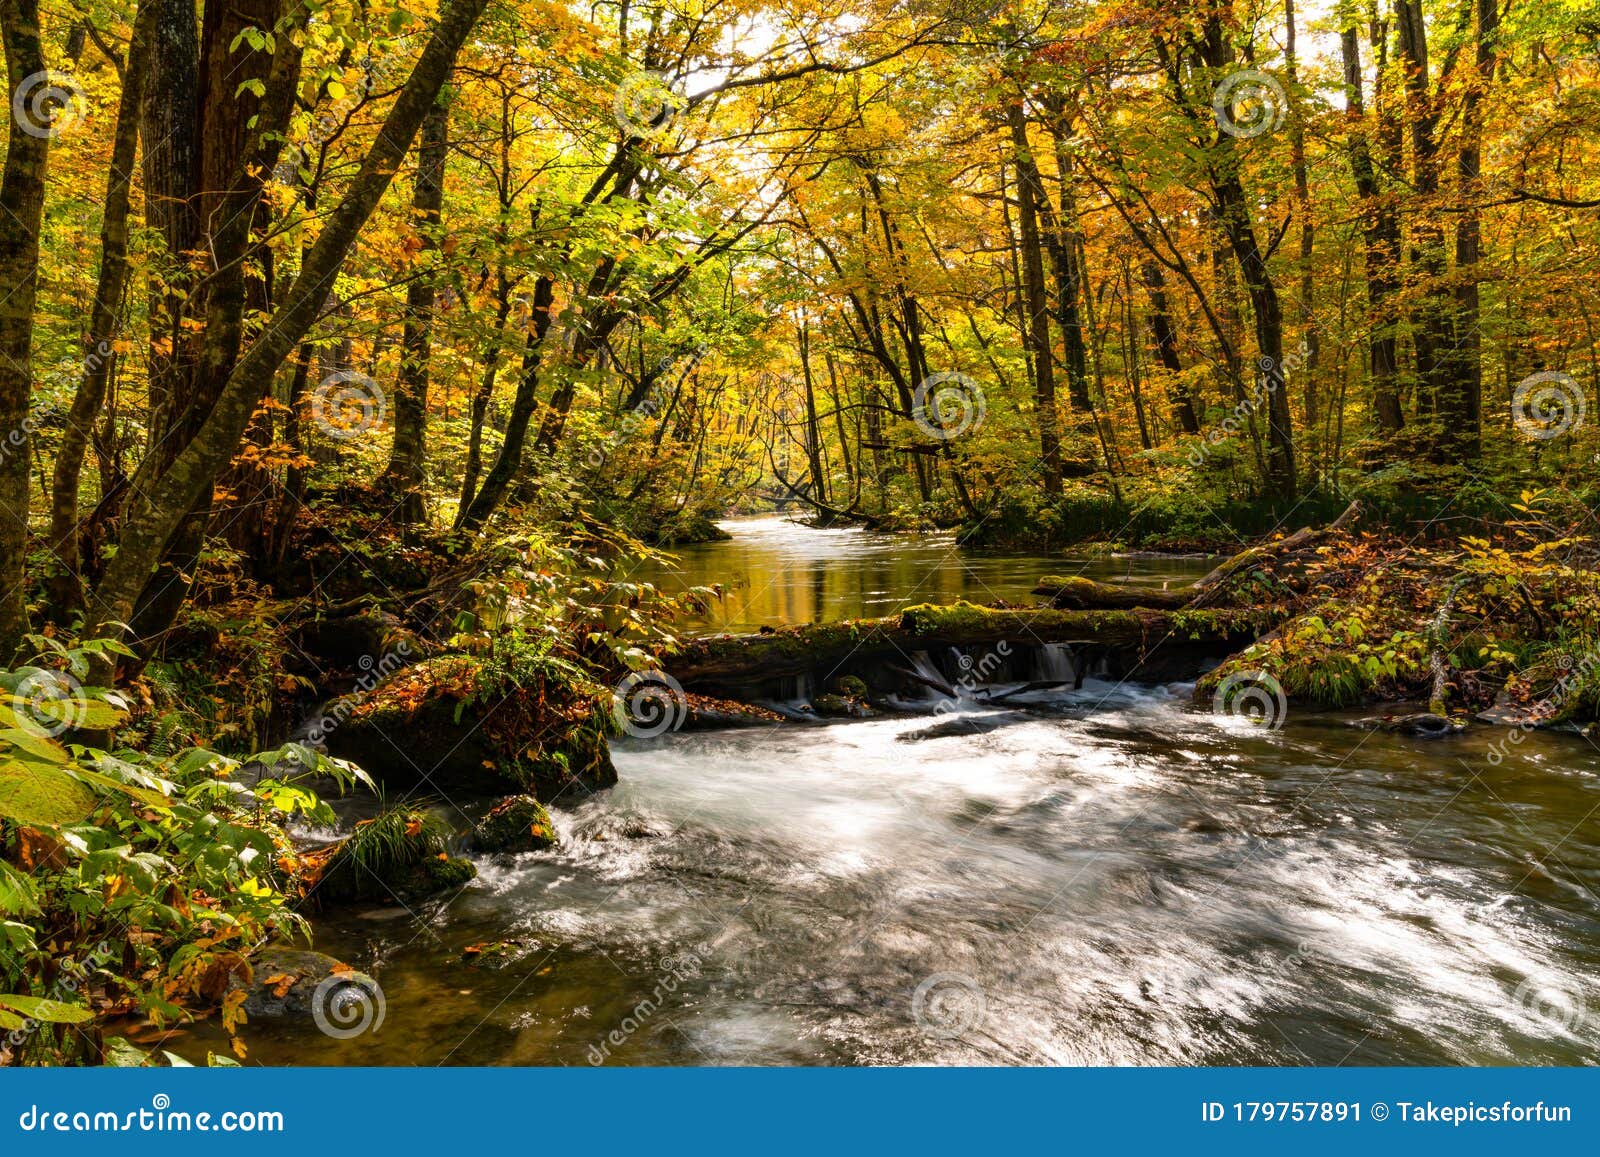 Beautiful Scenic View Of Oirase Mountain Stream Flow In The Colorful